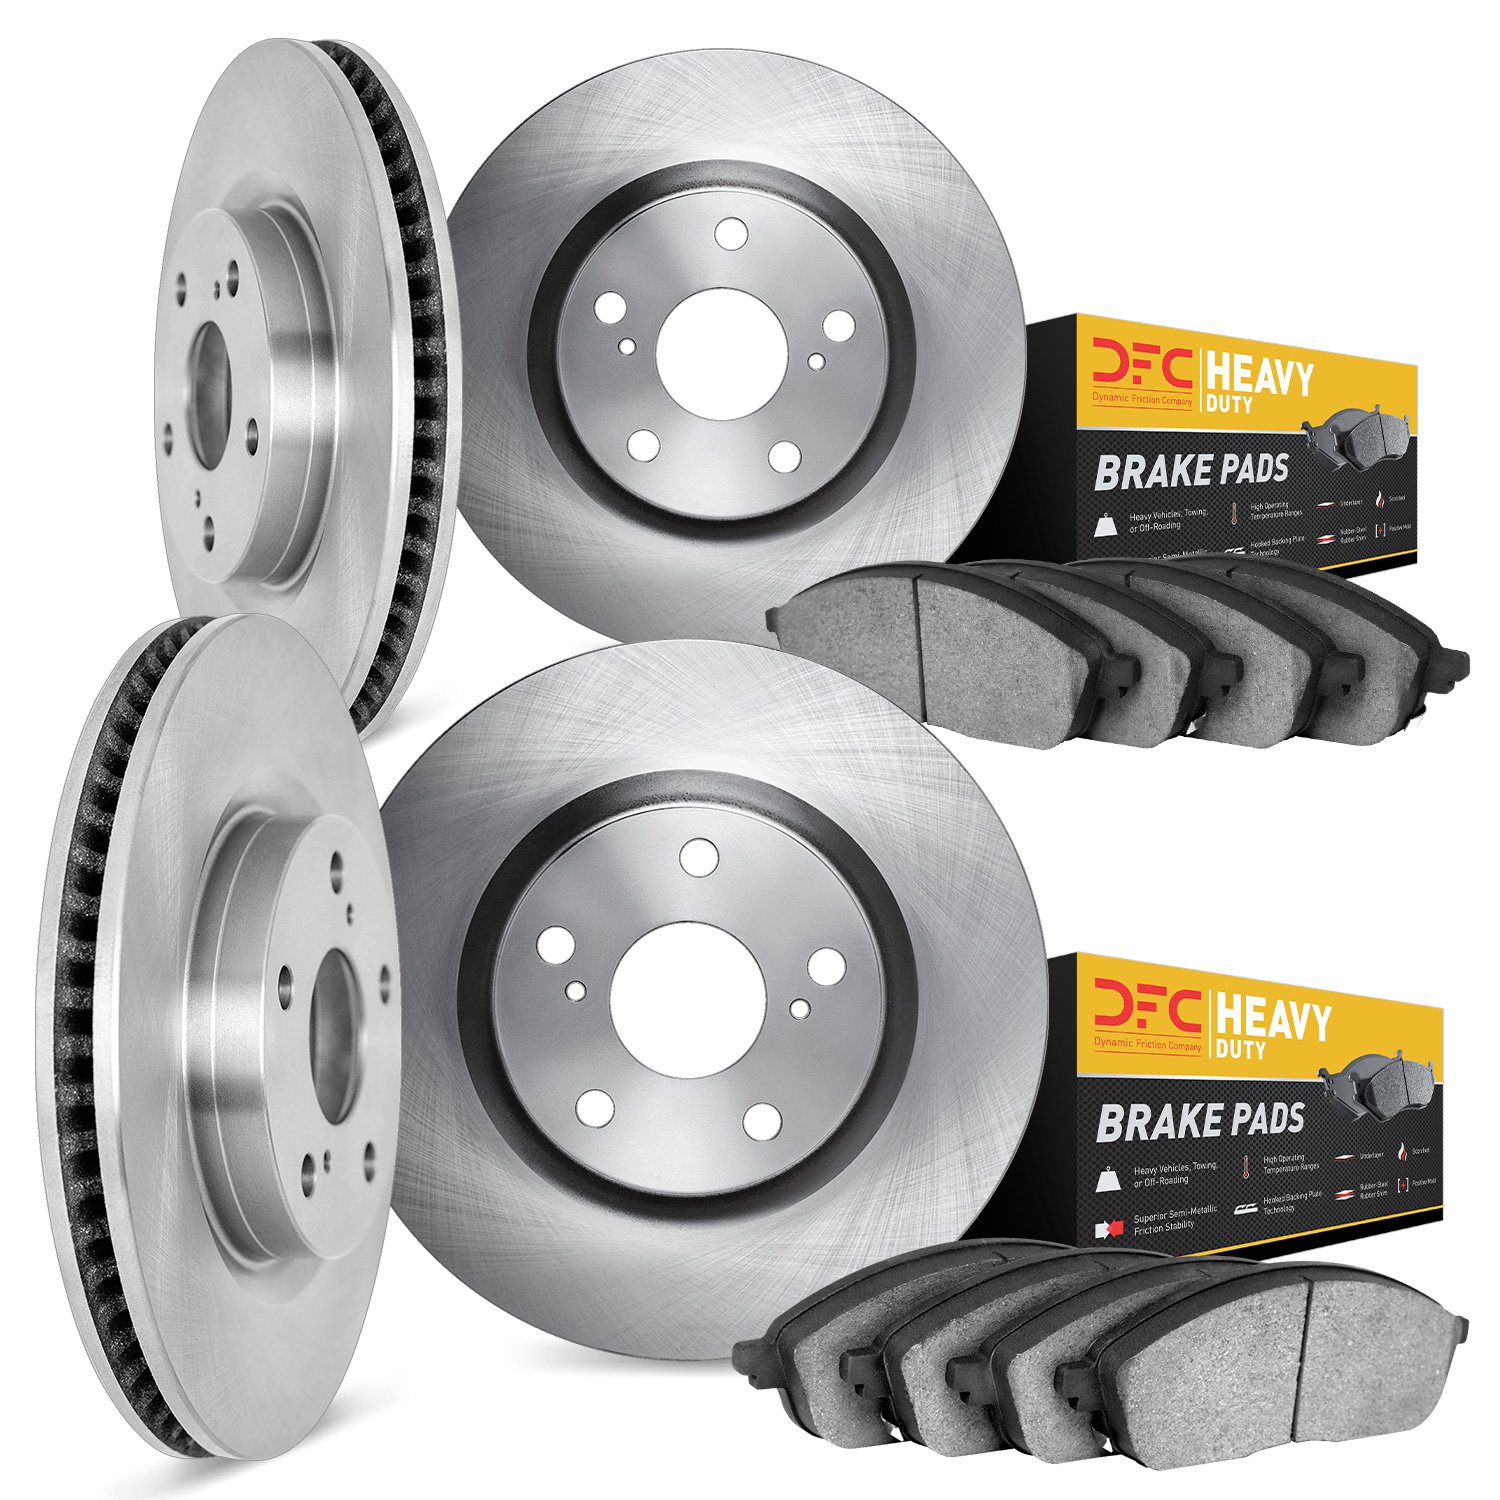 6204-76018 Brake Rotors w/Heavy-Duty Brake Pads Kit, Fits Select Lexus/Toyota/Scion, Position: Front and Rear